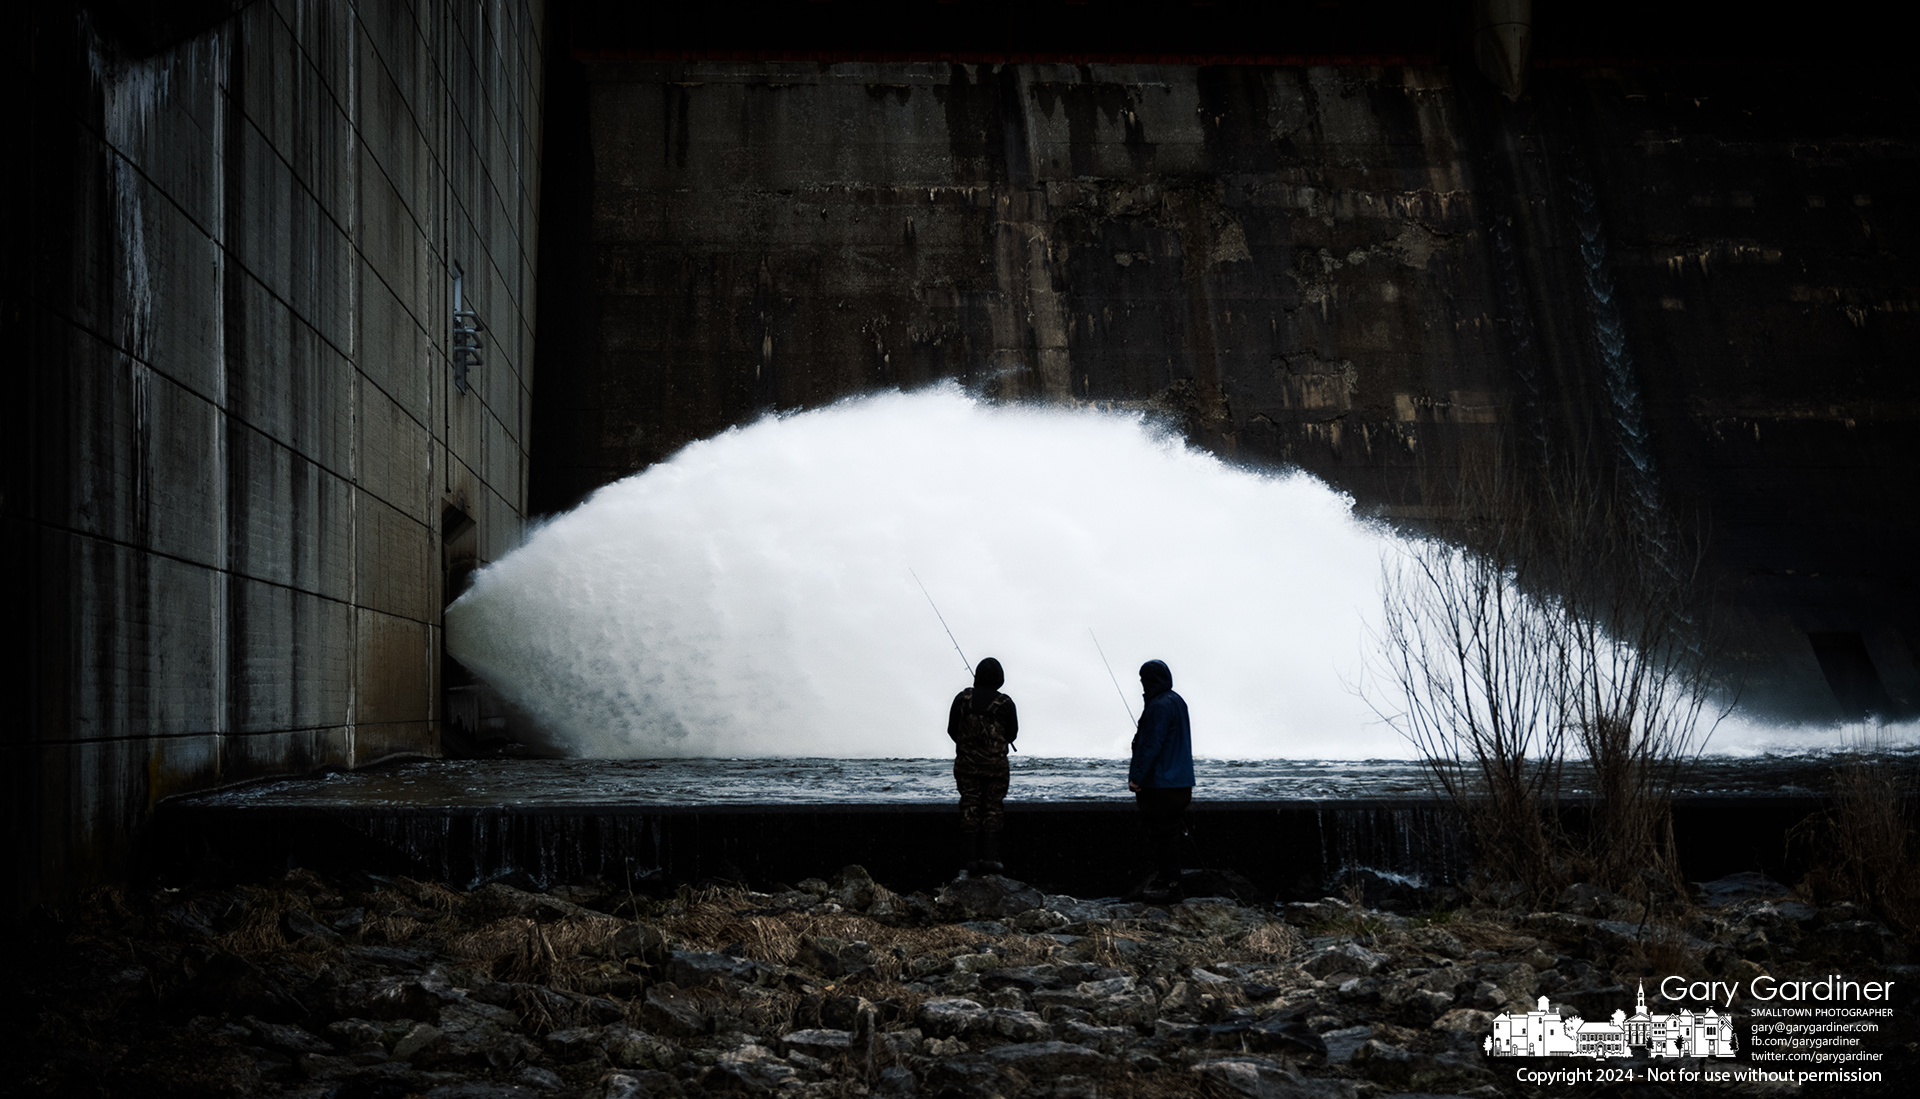 Father and son briefly fish below the spillway at Hoover Dam late in a rainy and cold Friday afternoon. My Final Photo for March 22, 2024. #Westerville #westervilleohio #westervillenews #uptownwestervilleohio #wvloh #ohio #f8wwwwwh #wwwwwh #f8 #everydayohio #ohiopix #ohio #everydayusa #apad